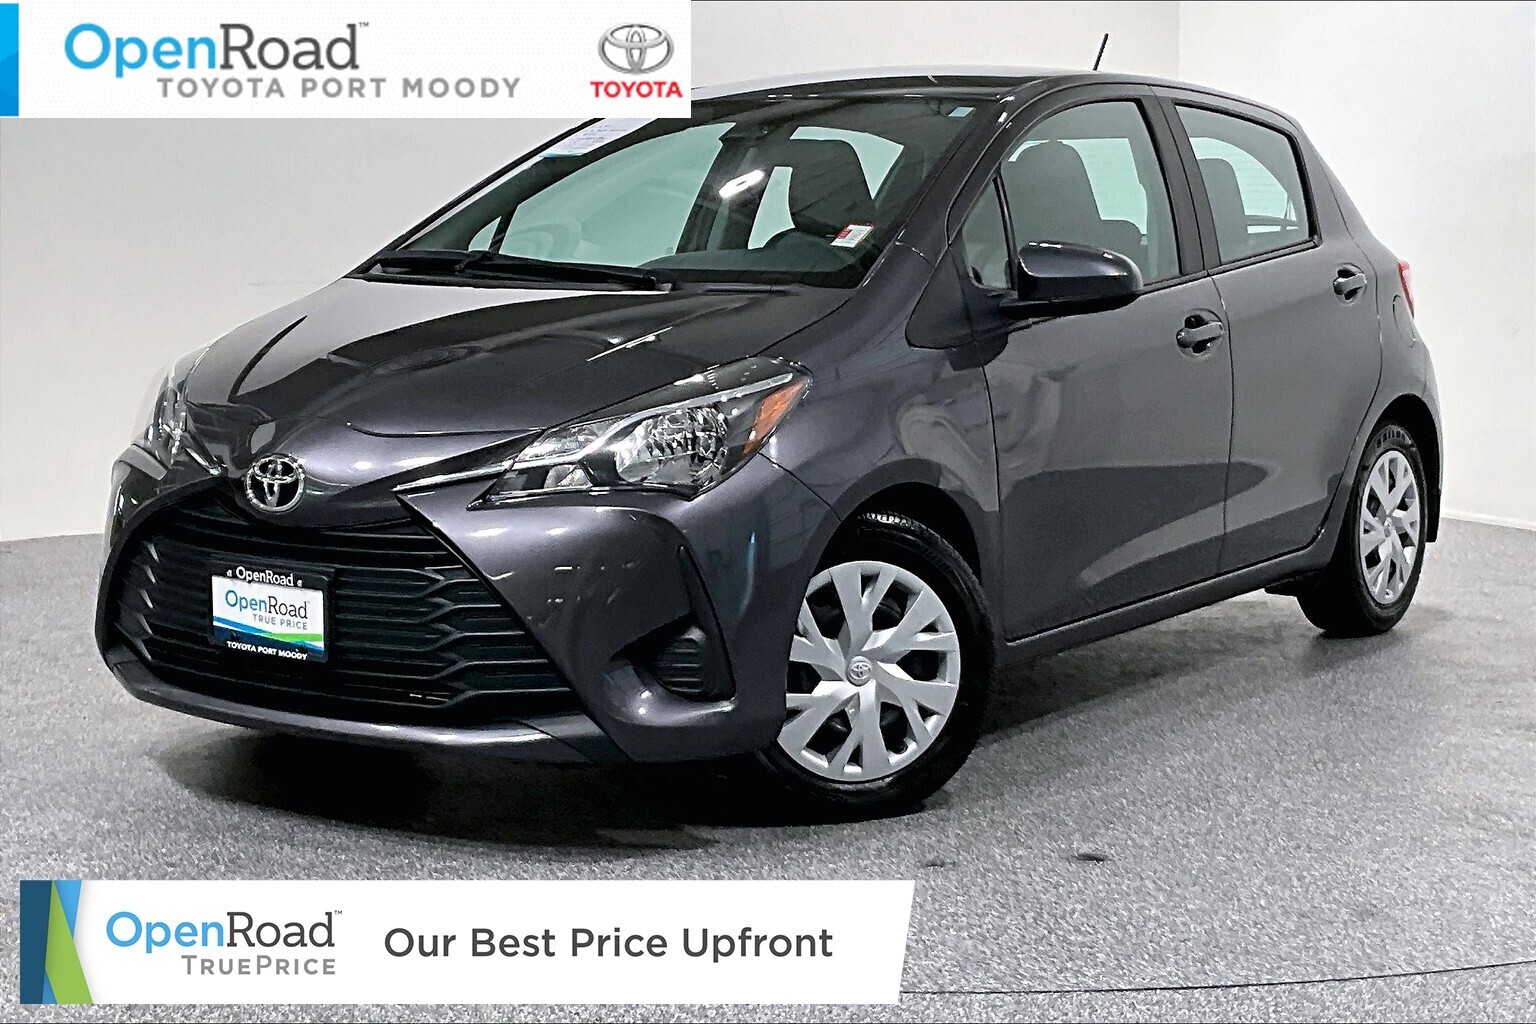 2019 Toyota Yaris 5 Dr LE Htbk 4A |OpenRoad True Price |Local |One O